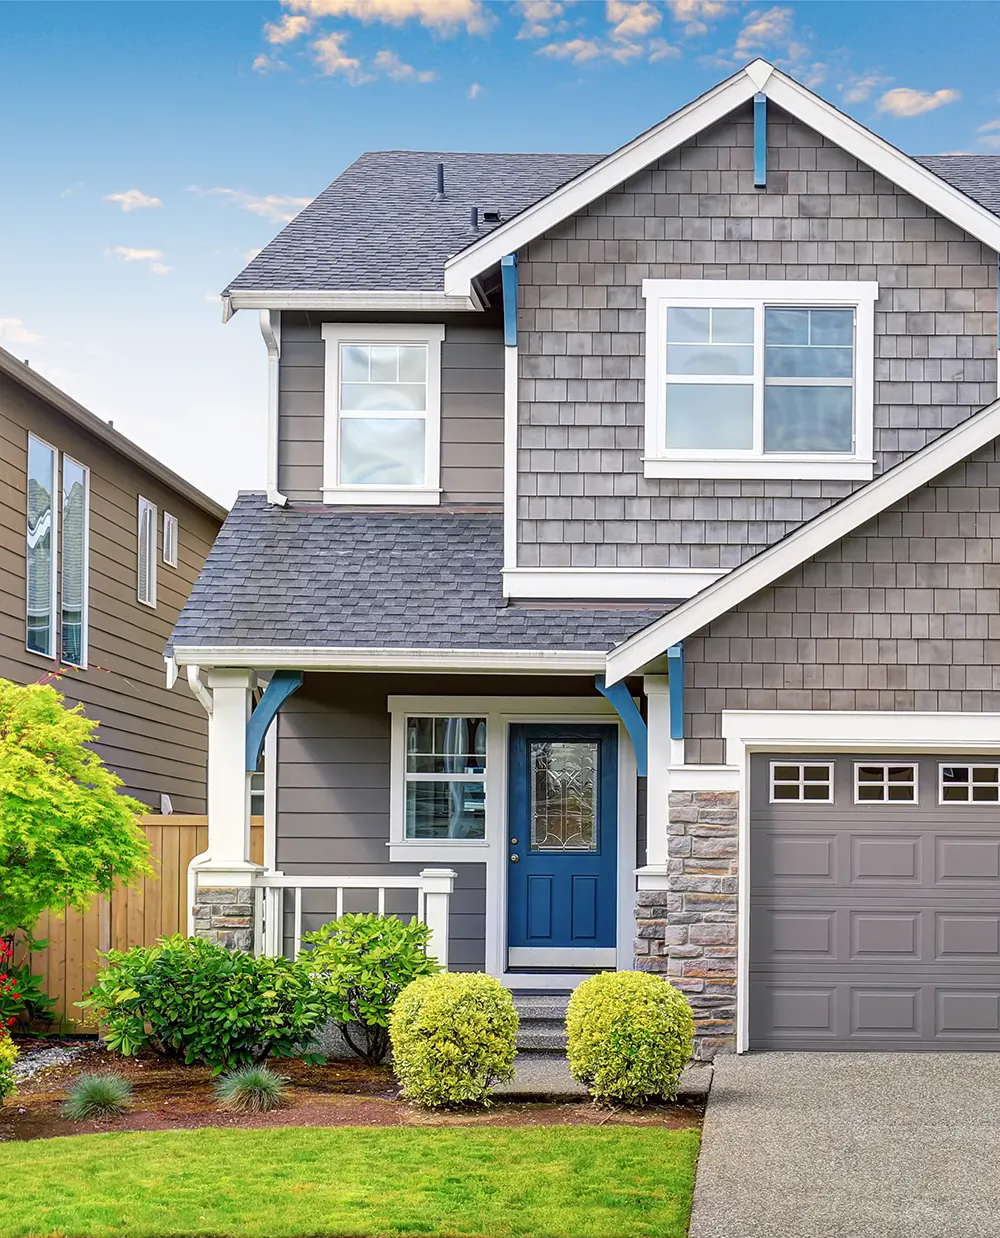 Discover the benefits of Aluminum Siding Installation in our comprehensive guide. Enhance your home's value and curb appeal today!